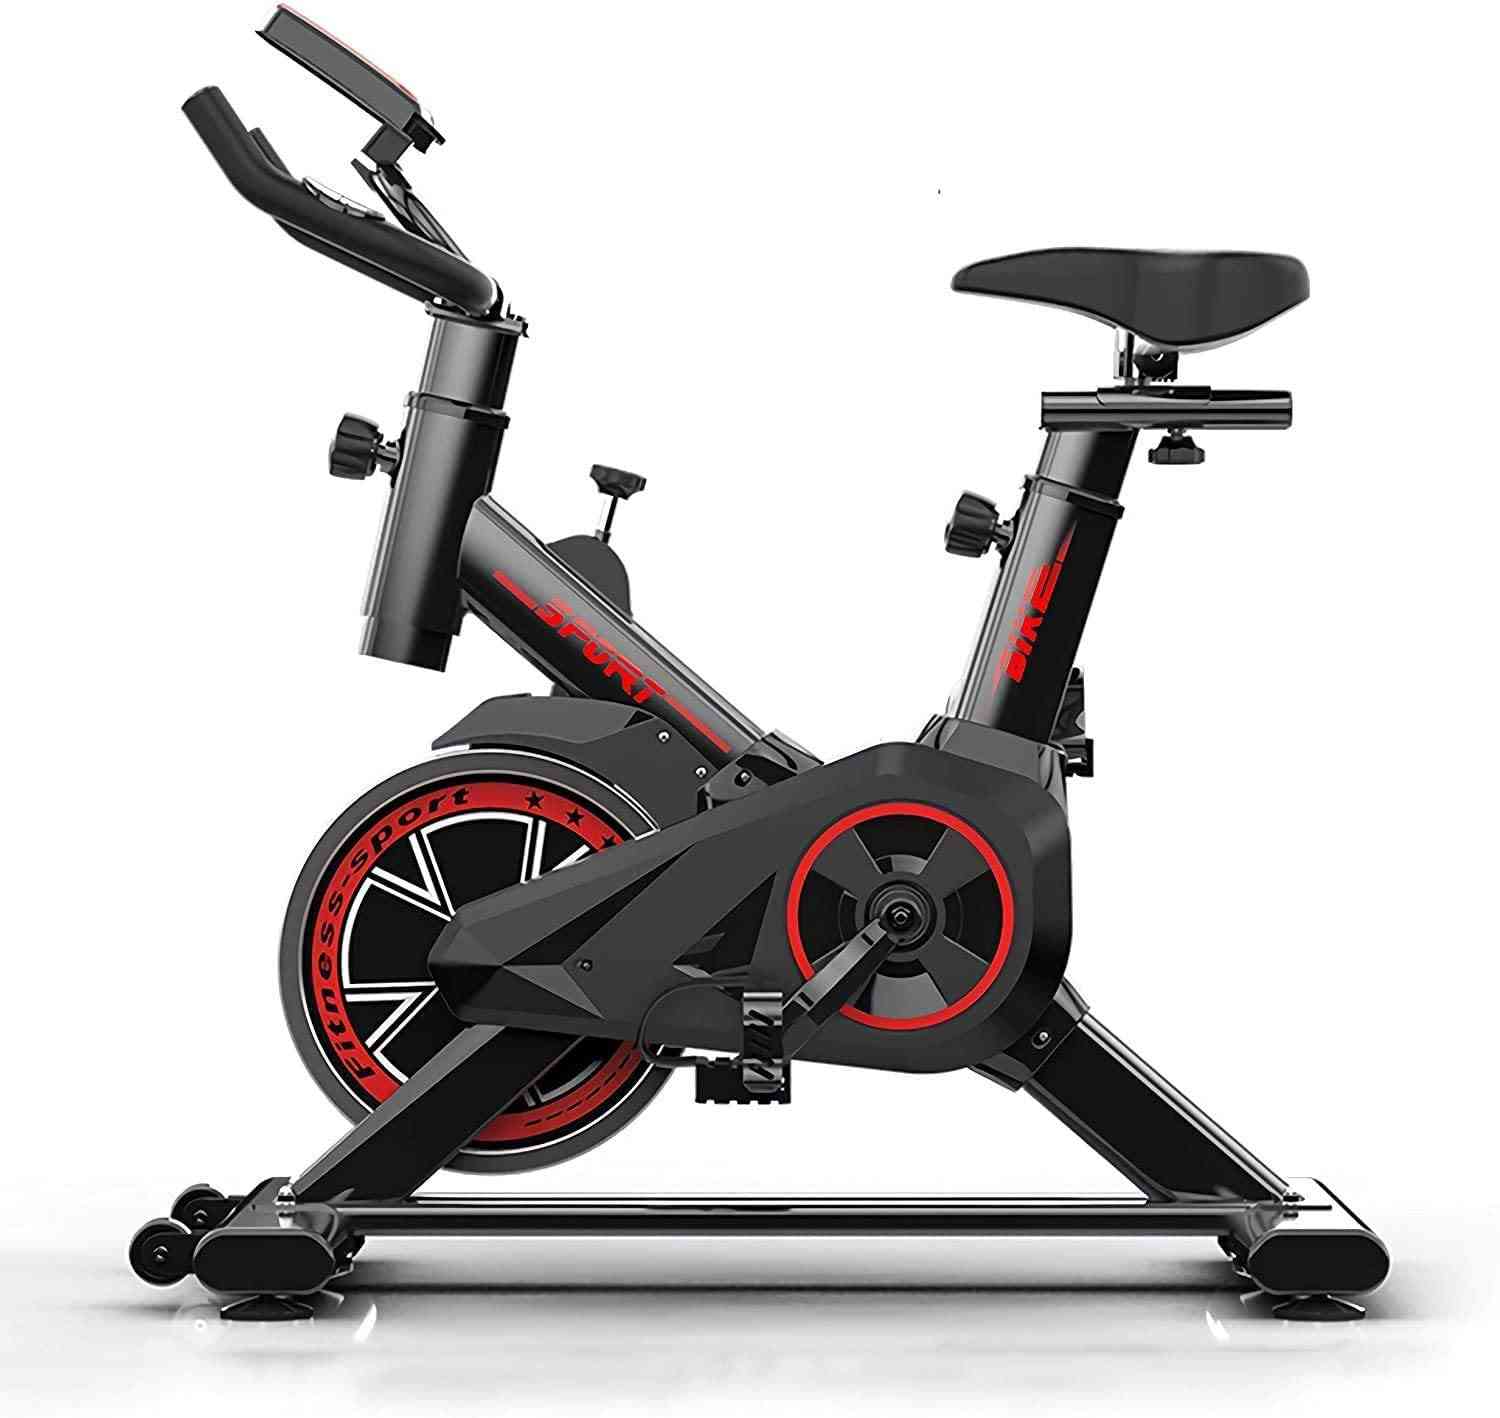 Ultra-quiet Sports Fitness Exercise Bike - Indoor Cycling